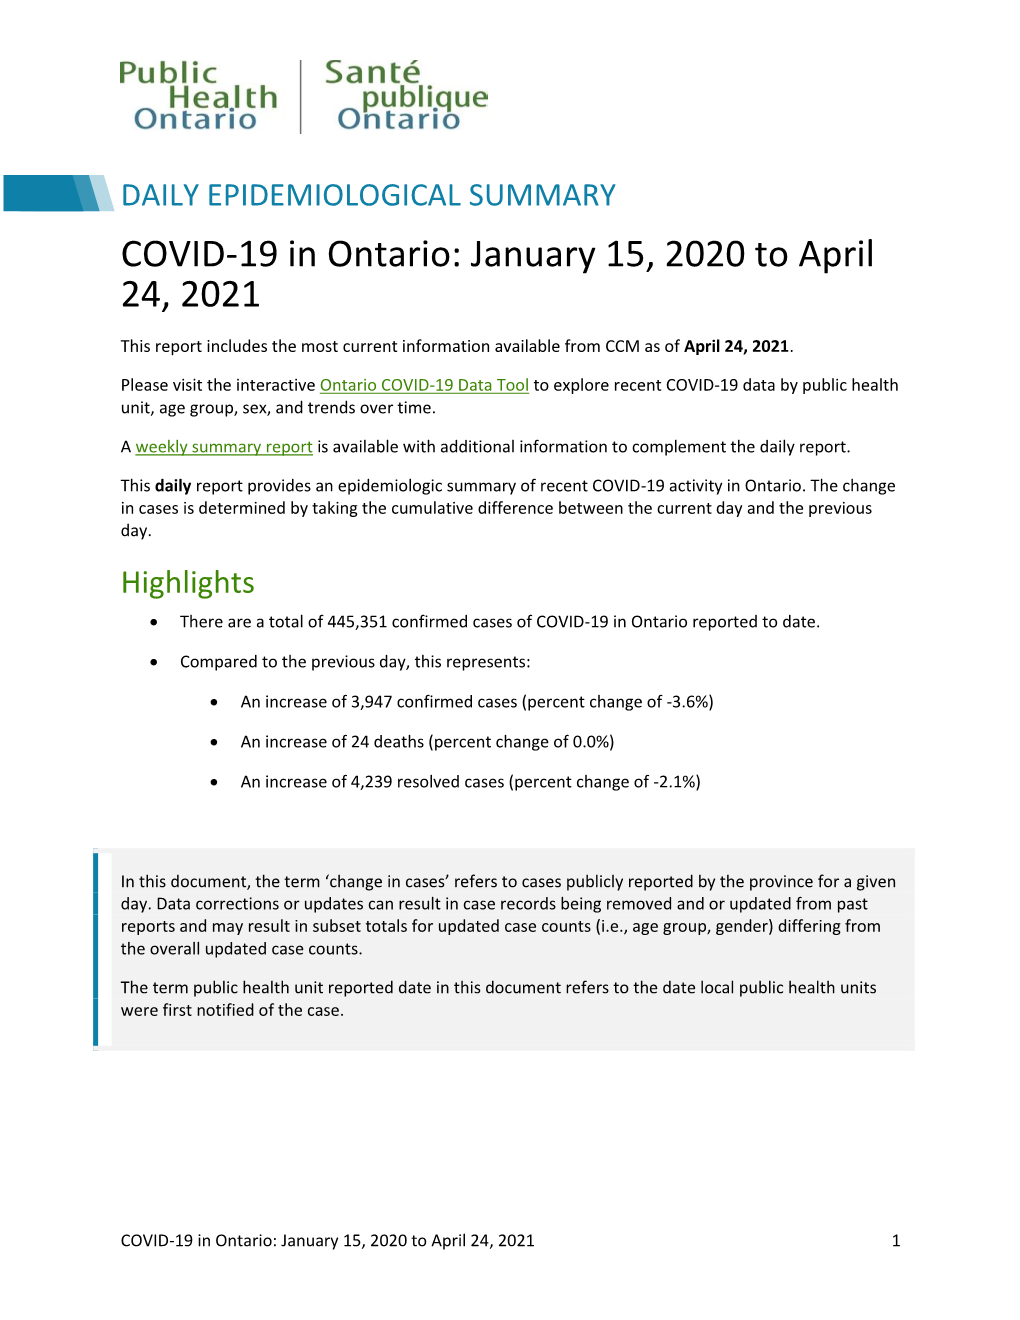 COVID-19 in Ontario: January 15, 2020 to April 24, 2021